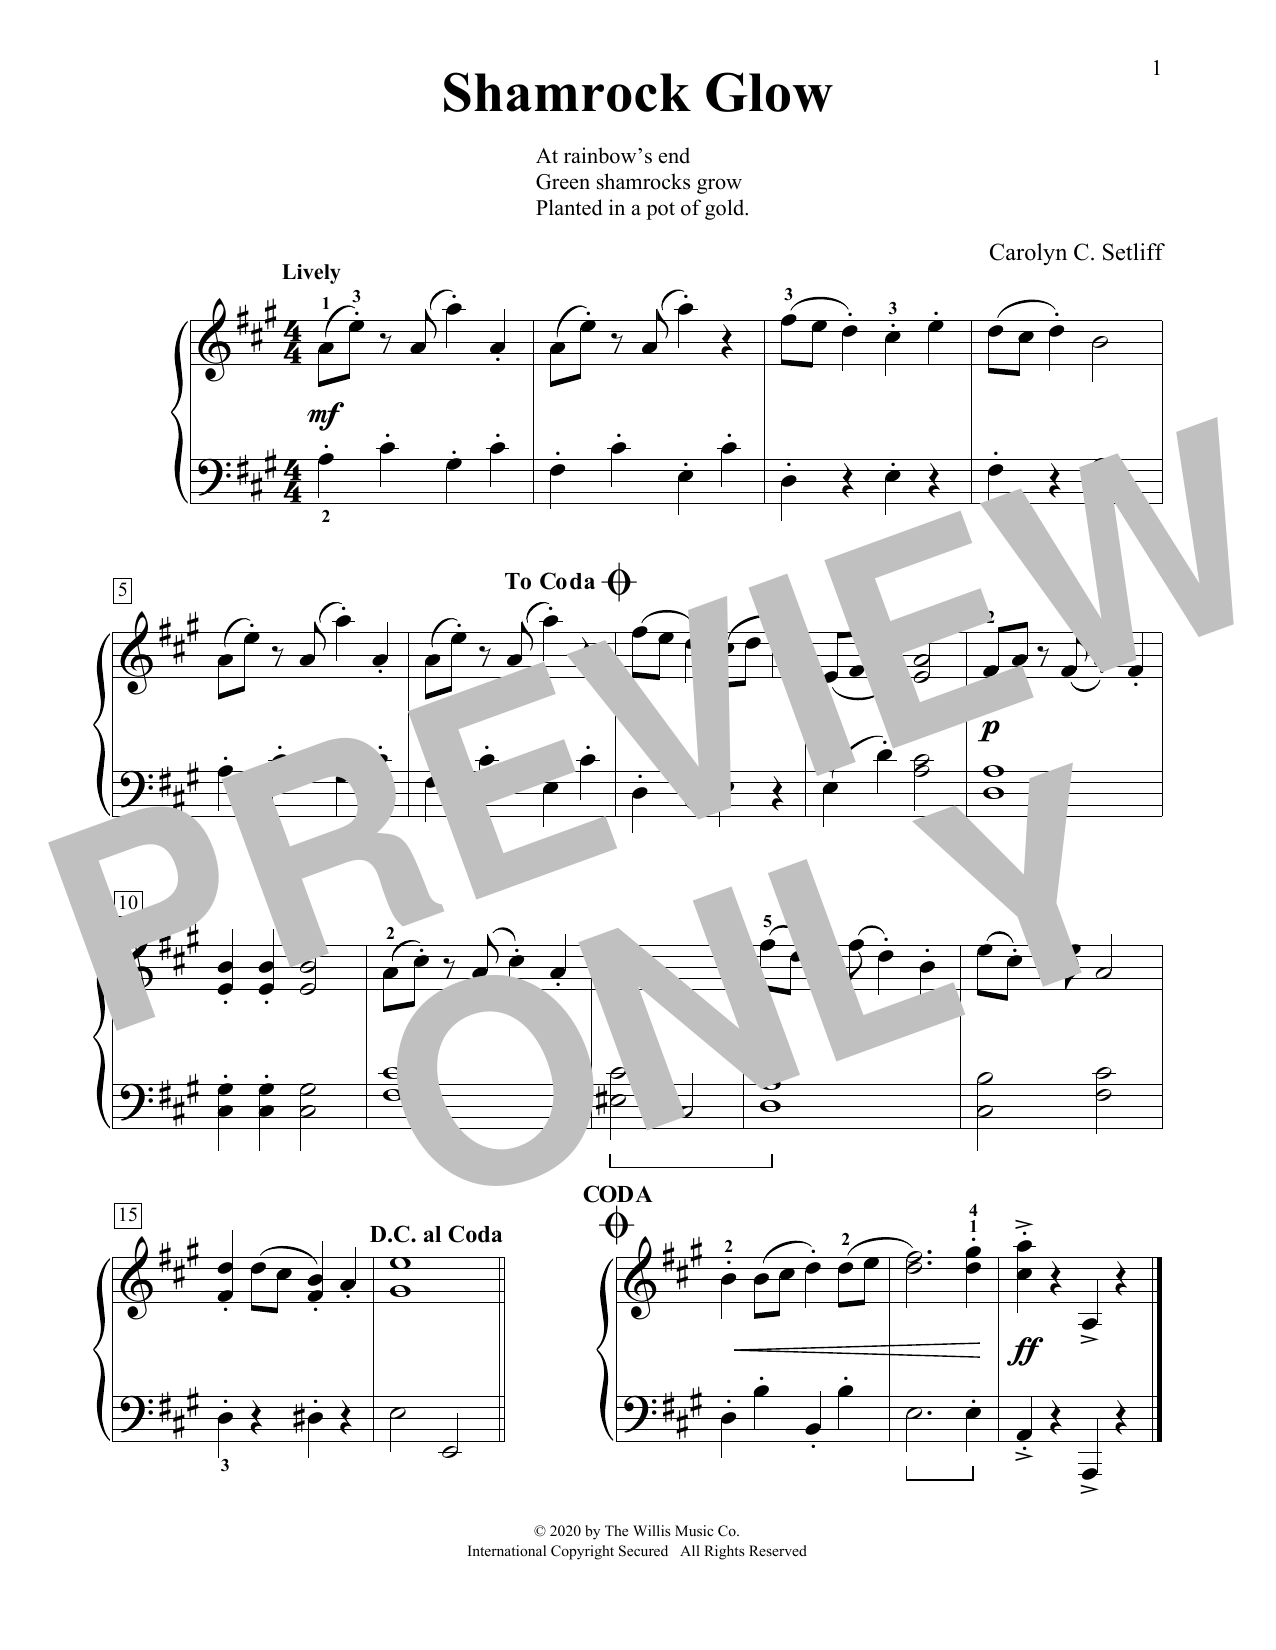 Carolyn C. Setliff Shamrock Glow sheet music preview music notes and score for Educational Piano including 1 page(s)